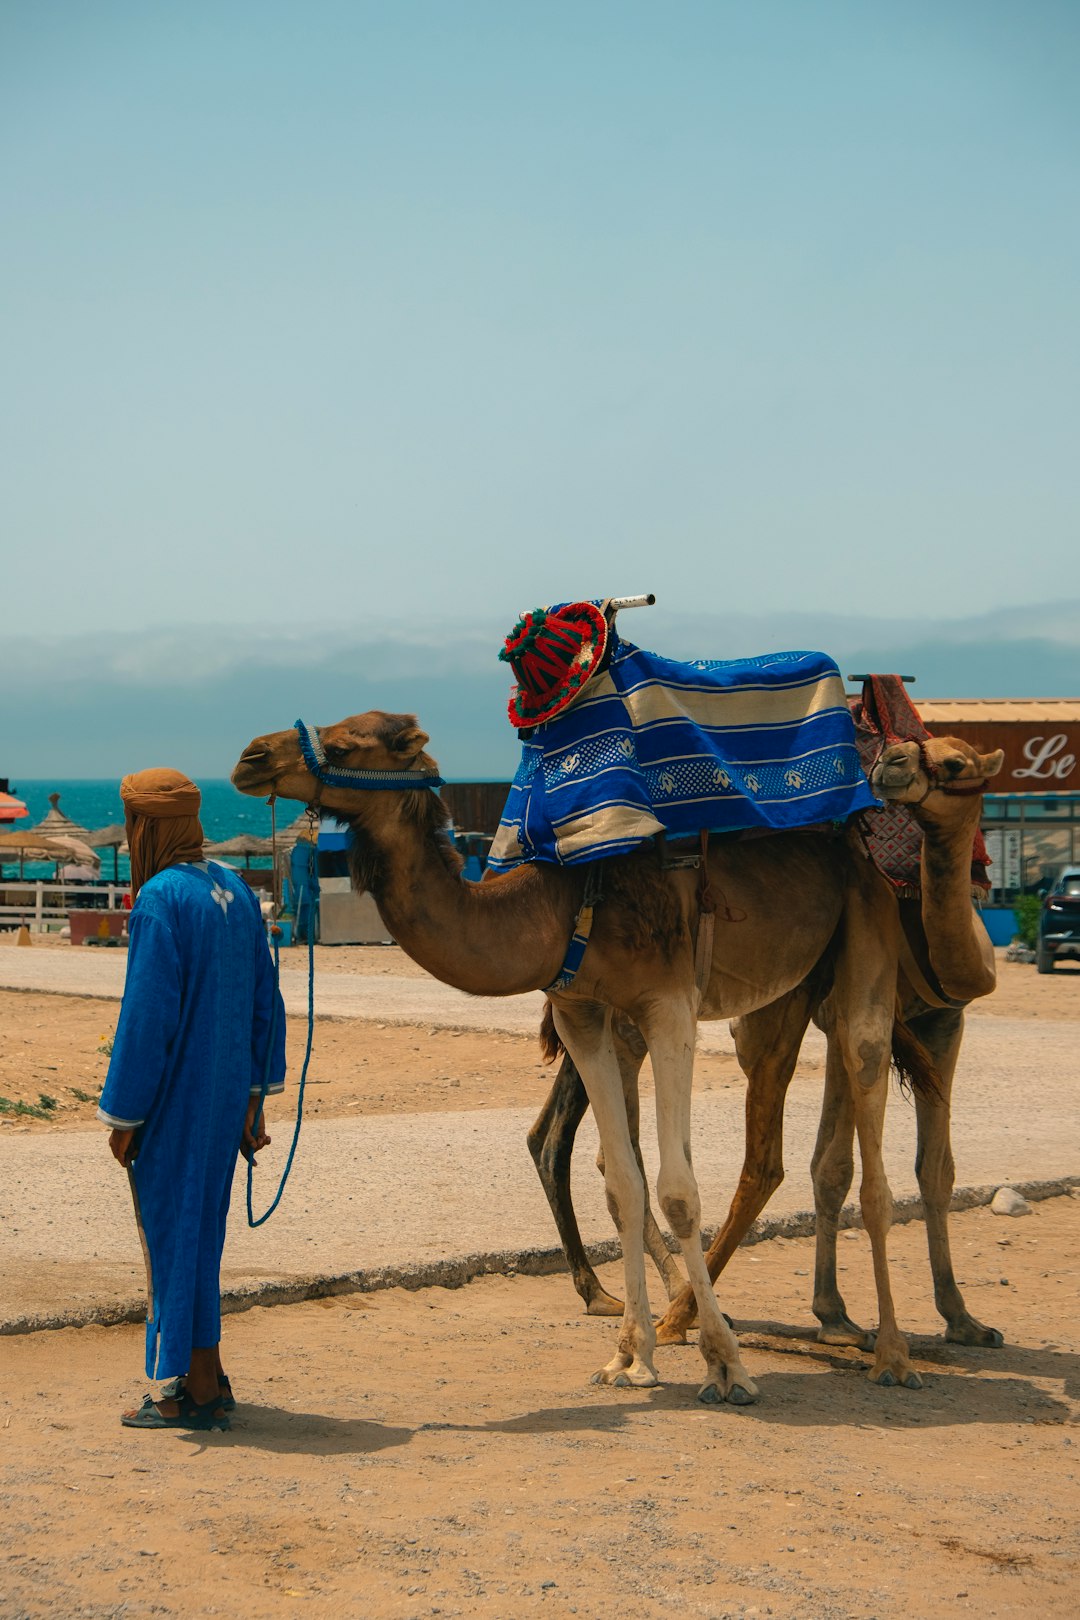 Travel Tips and Stories of Morocco in Morocco